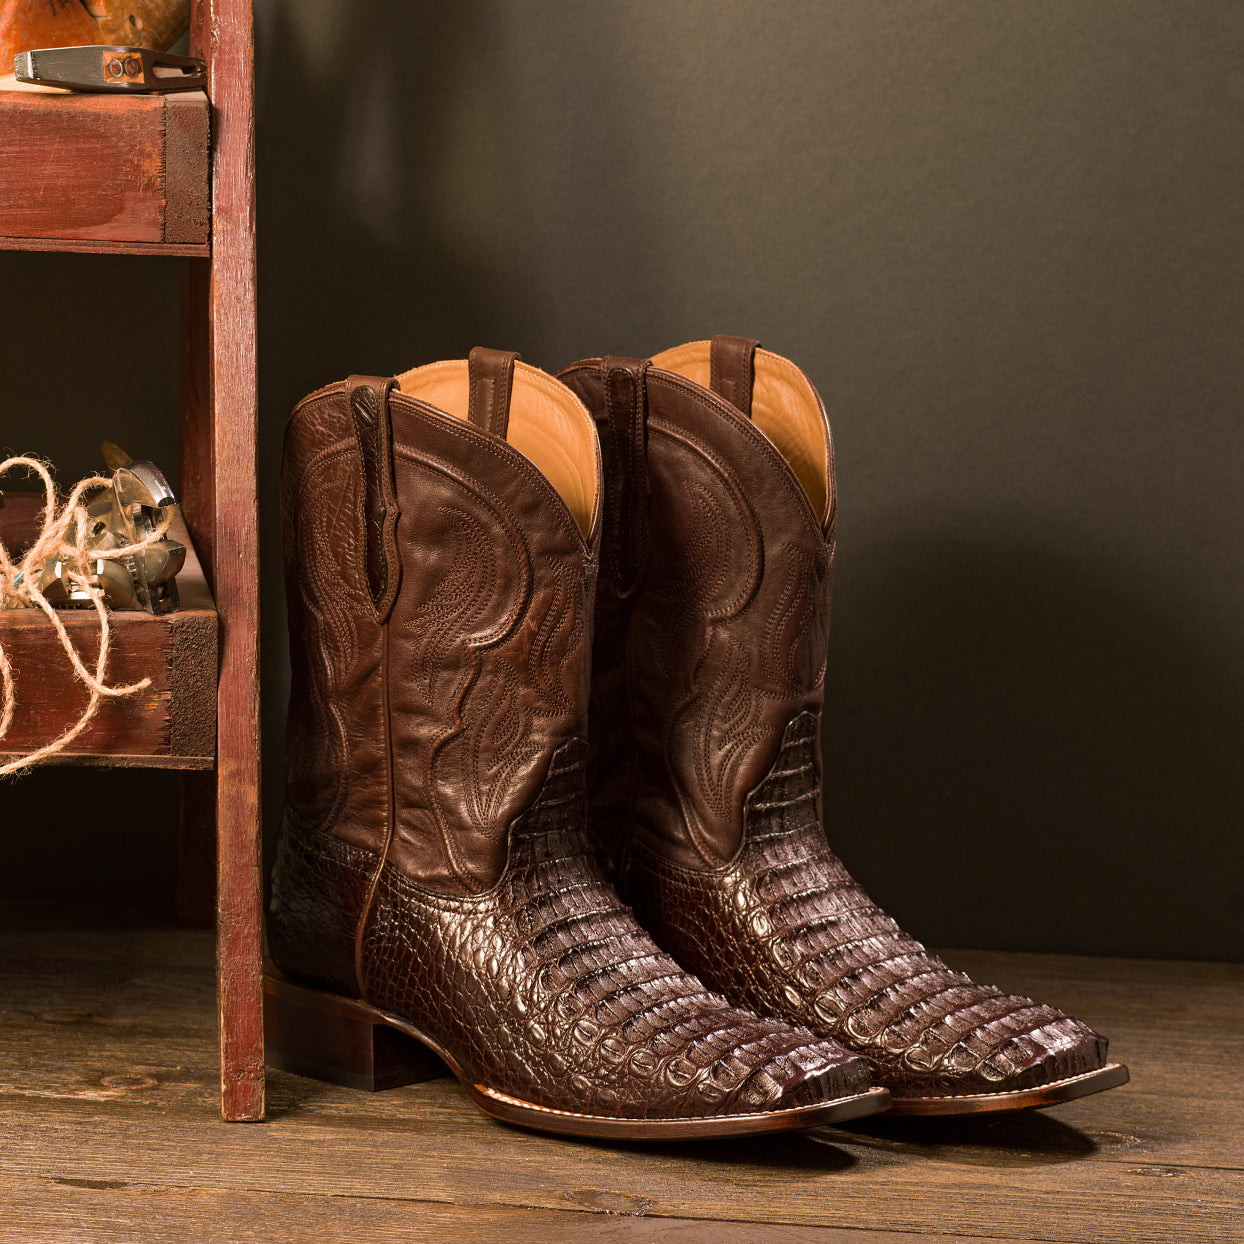 A pair of RUJO caiman cowboy boots next to a wooden shelf